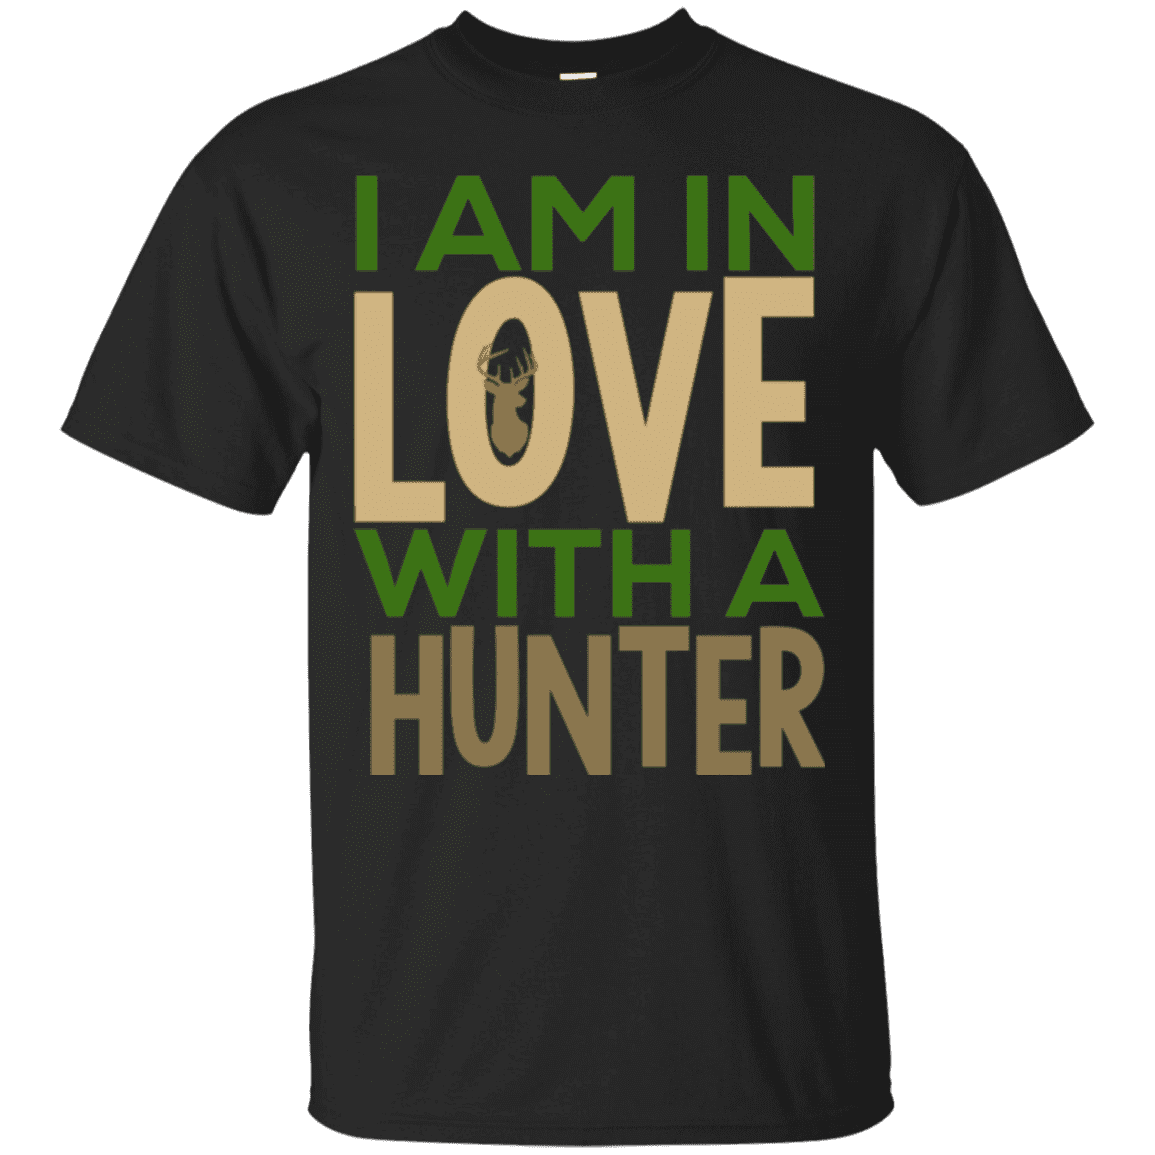 I'am Inlove With A Hunter Men Tee - STUDIO 11 COUTURE